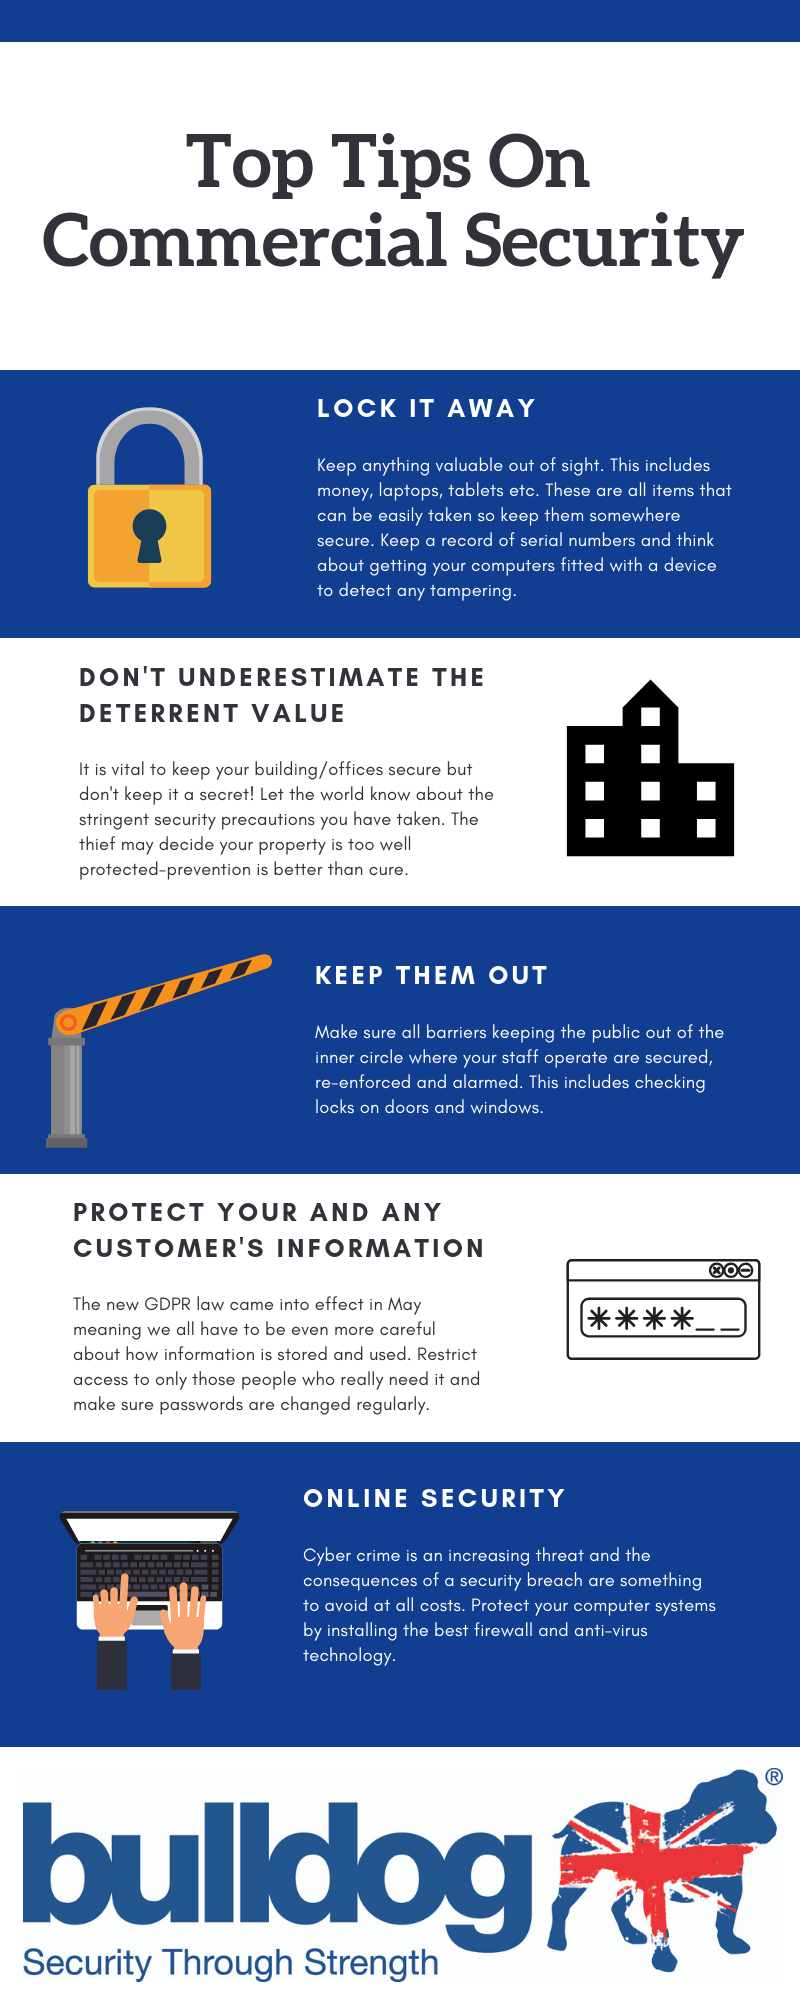 Top Tips On Commercial Security.png